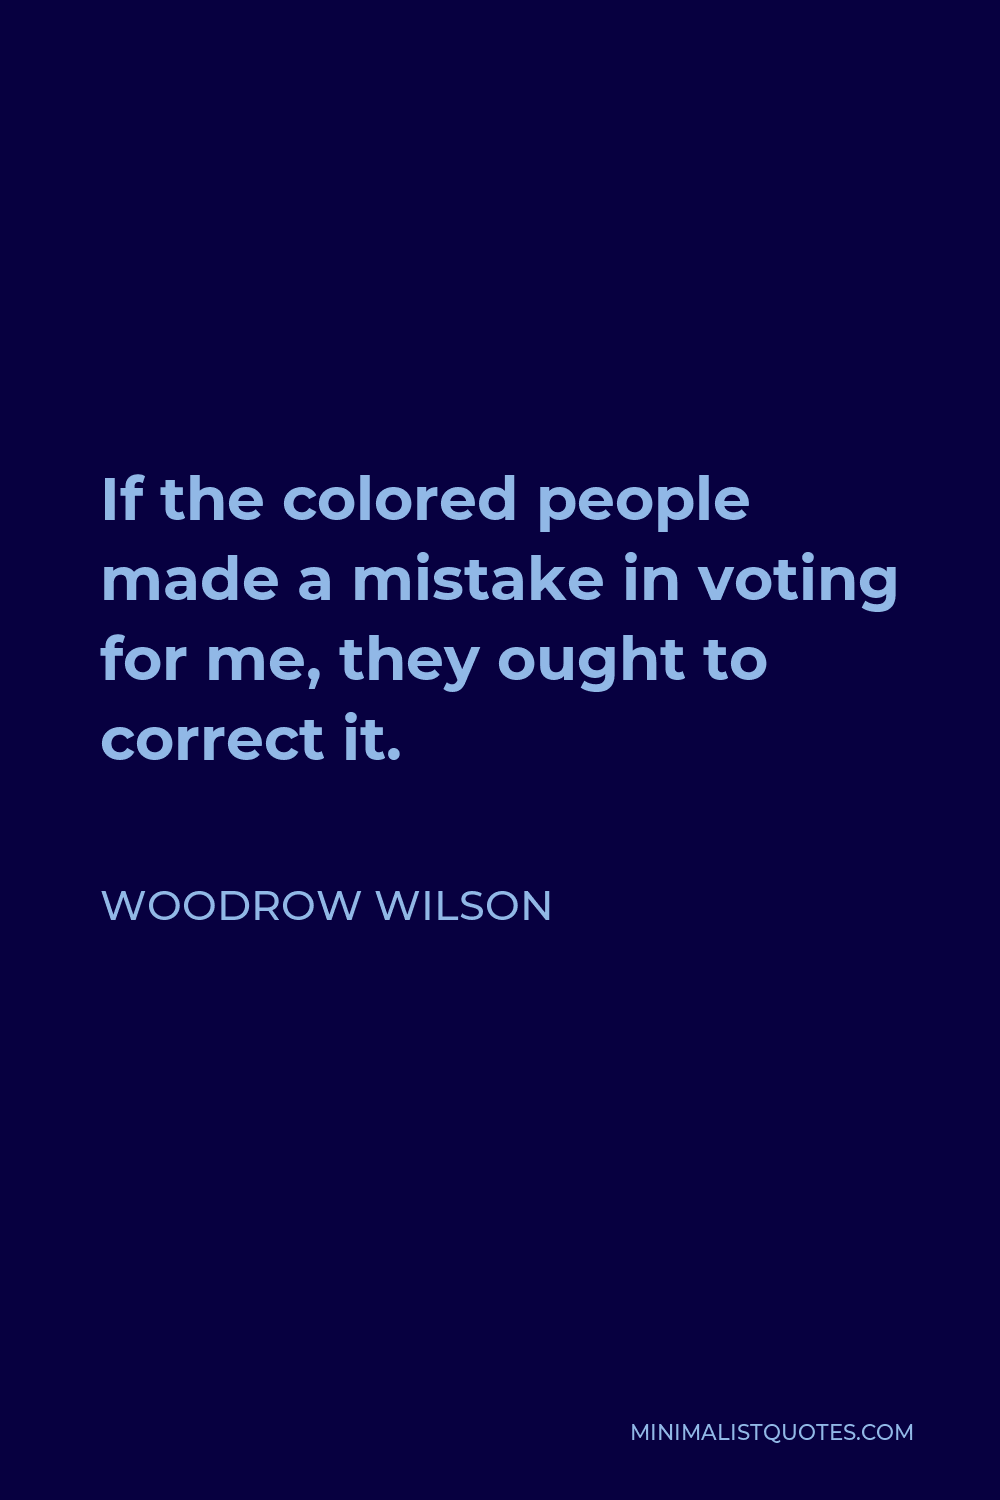 Woodrow Wilson Quote - If the colored people made a mistake in voting for me, they ought to correct it.